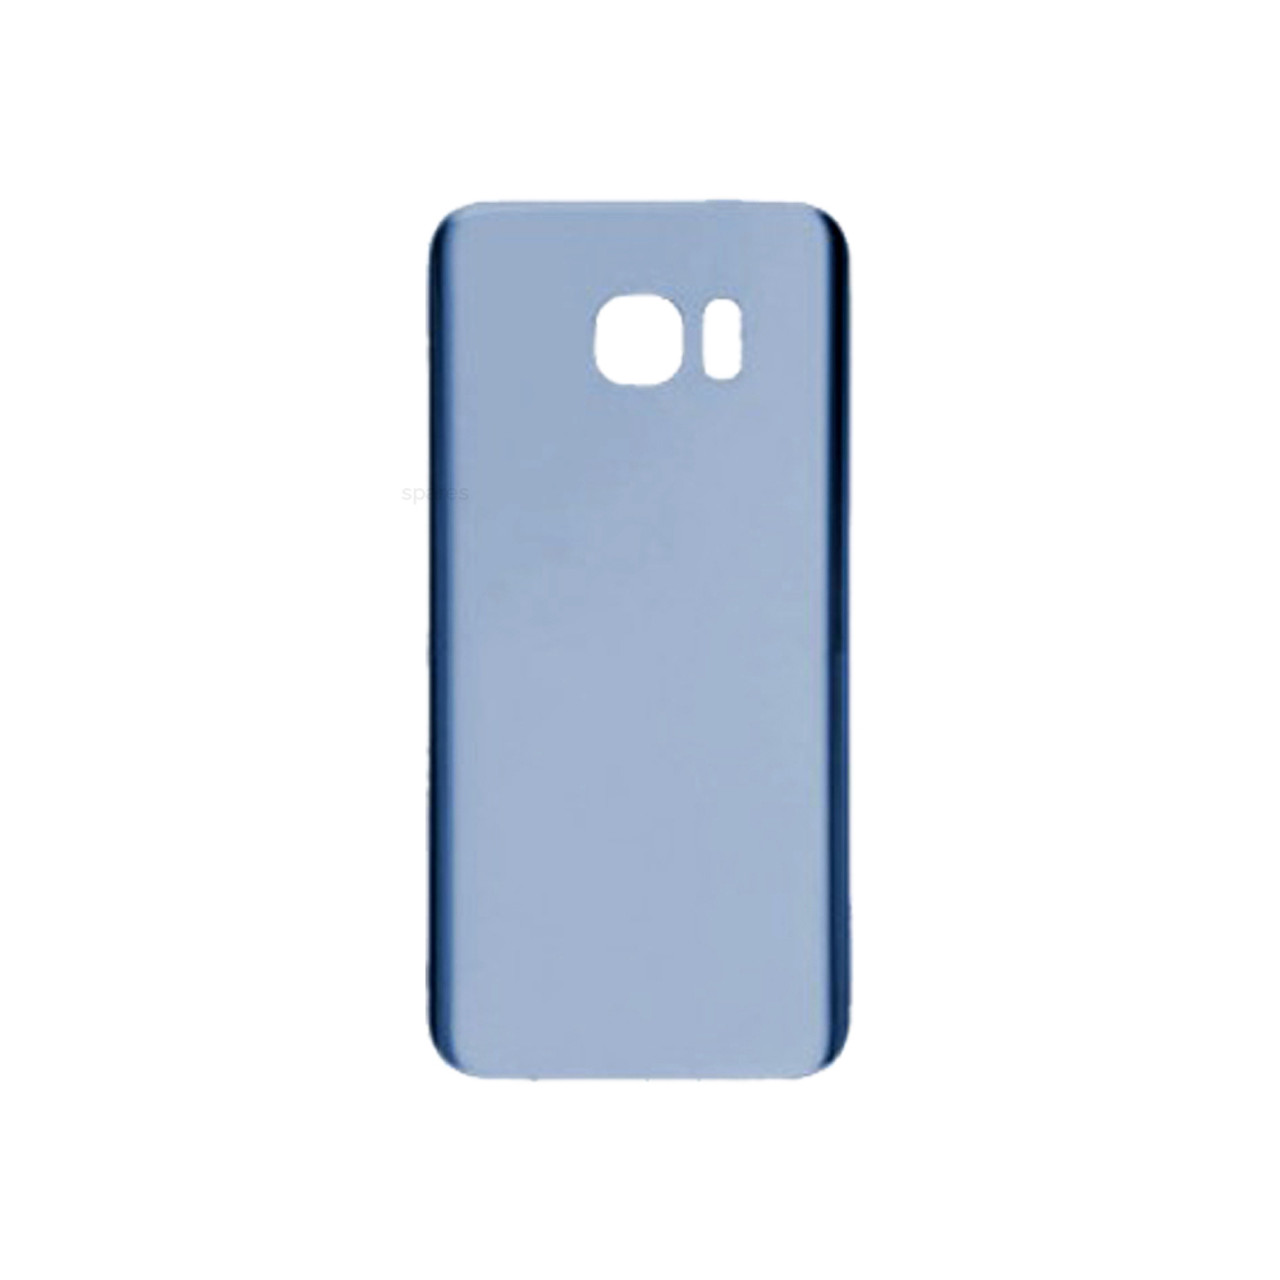 Galaxy S7 Edge - Replacement Back Glass - Coral Blue - SM-G975